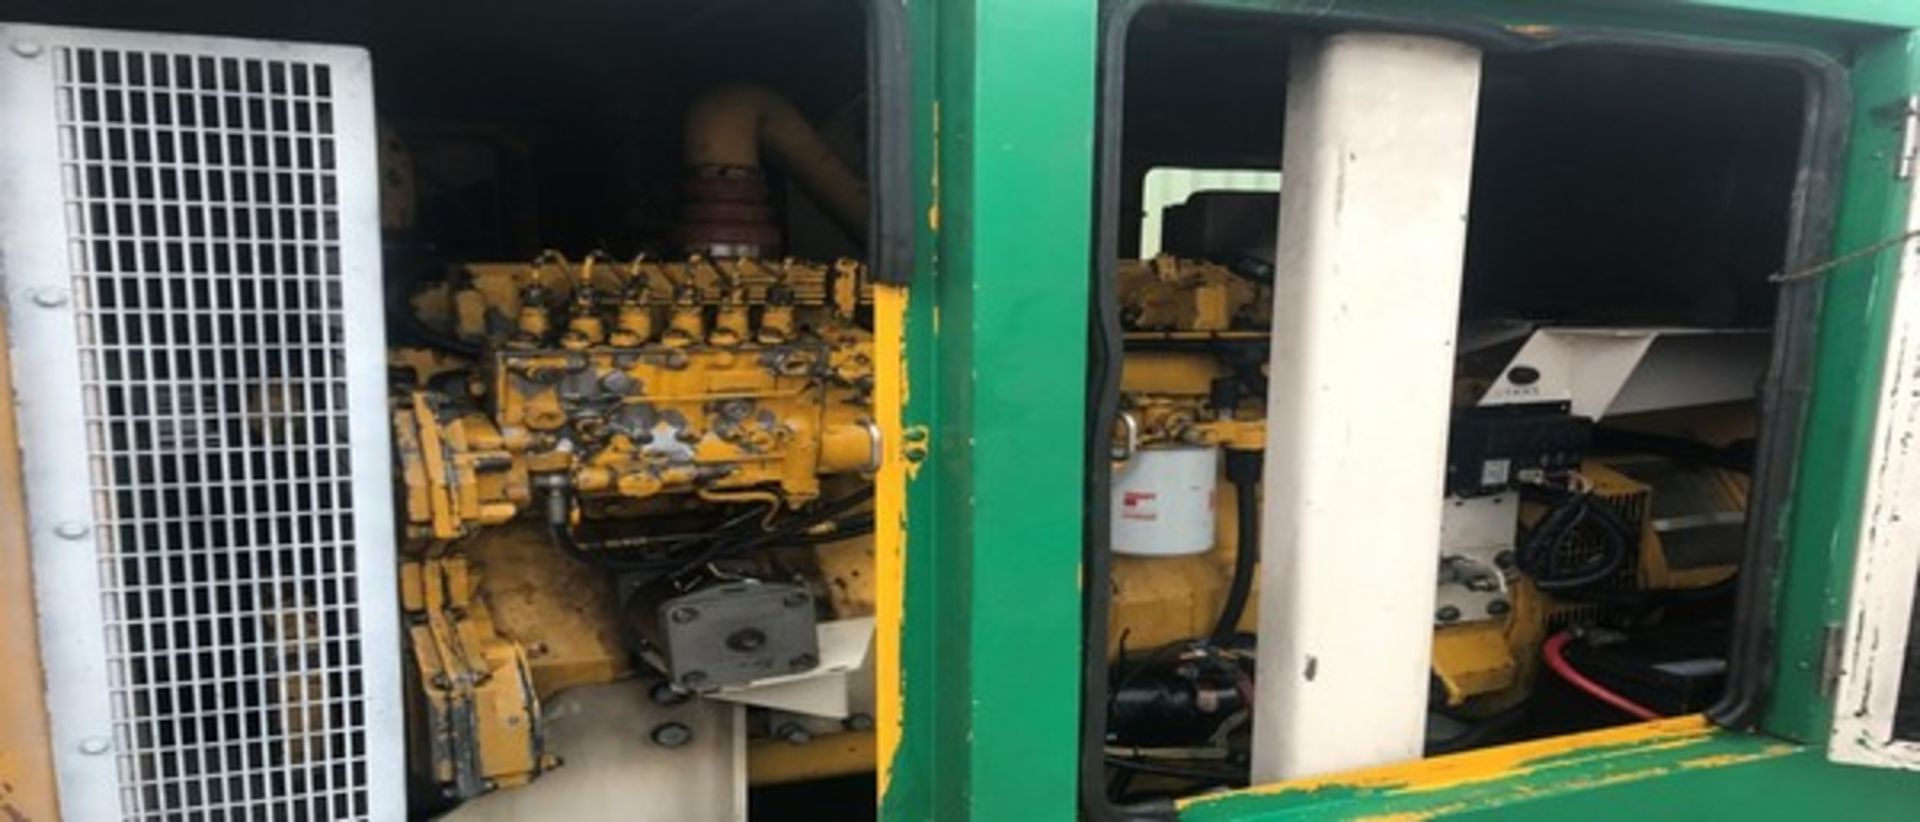 1998 F G WILSON P160 generator. S/N C8251C/003. 38564 hrs. Engine refurbished April 2016. Only worke - Image 5 of 7